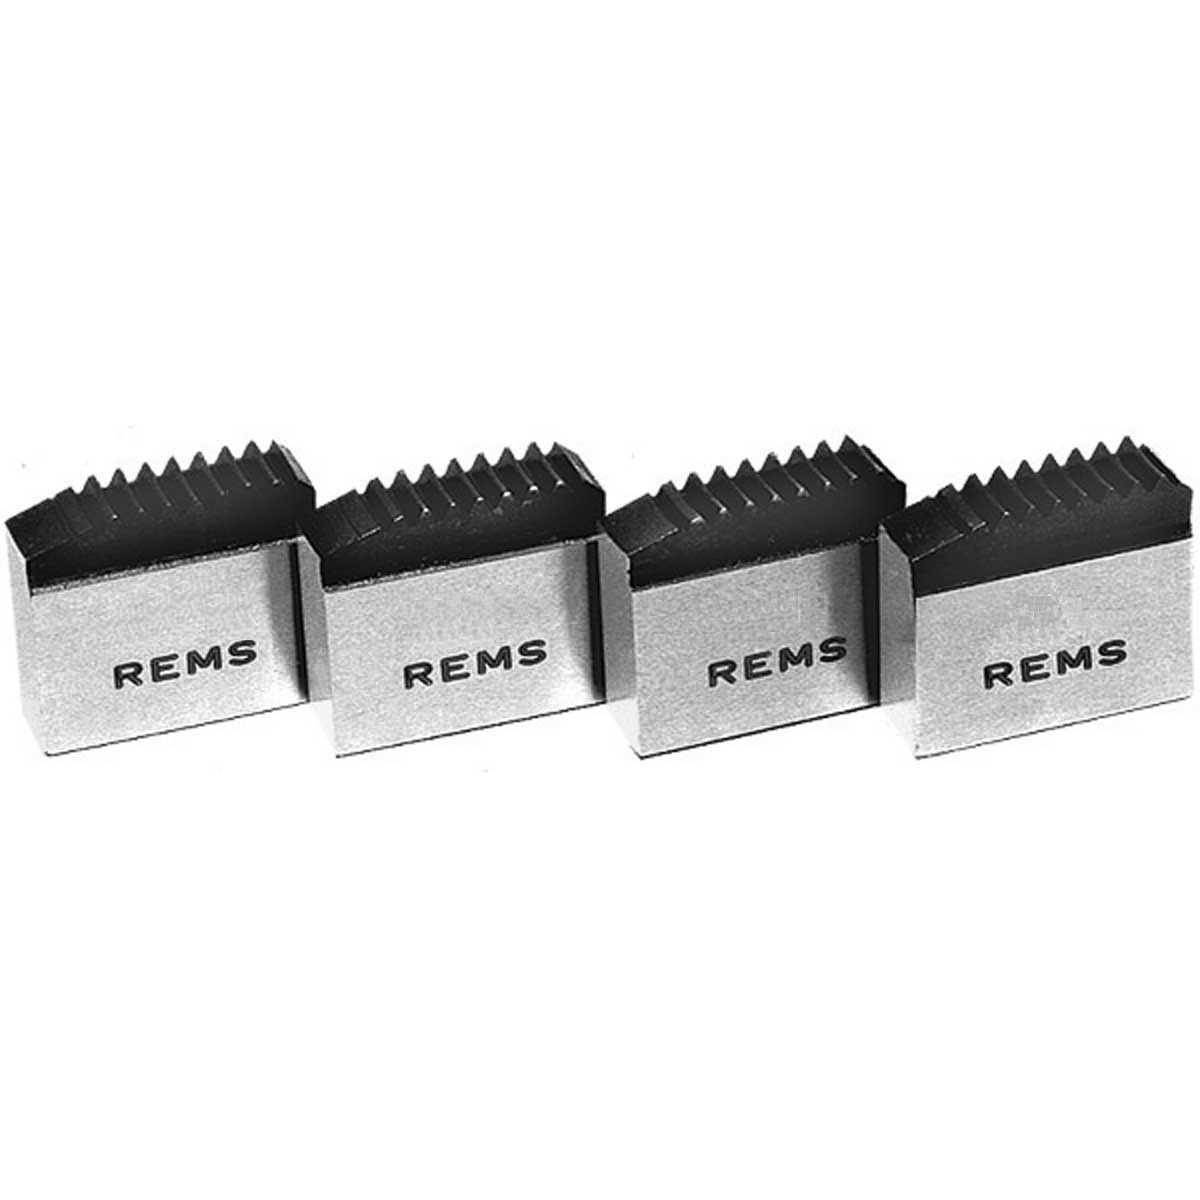 REMS - 1/2" Replacement Die Set, 521232